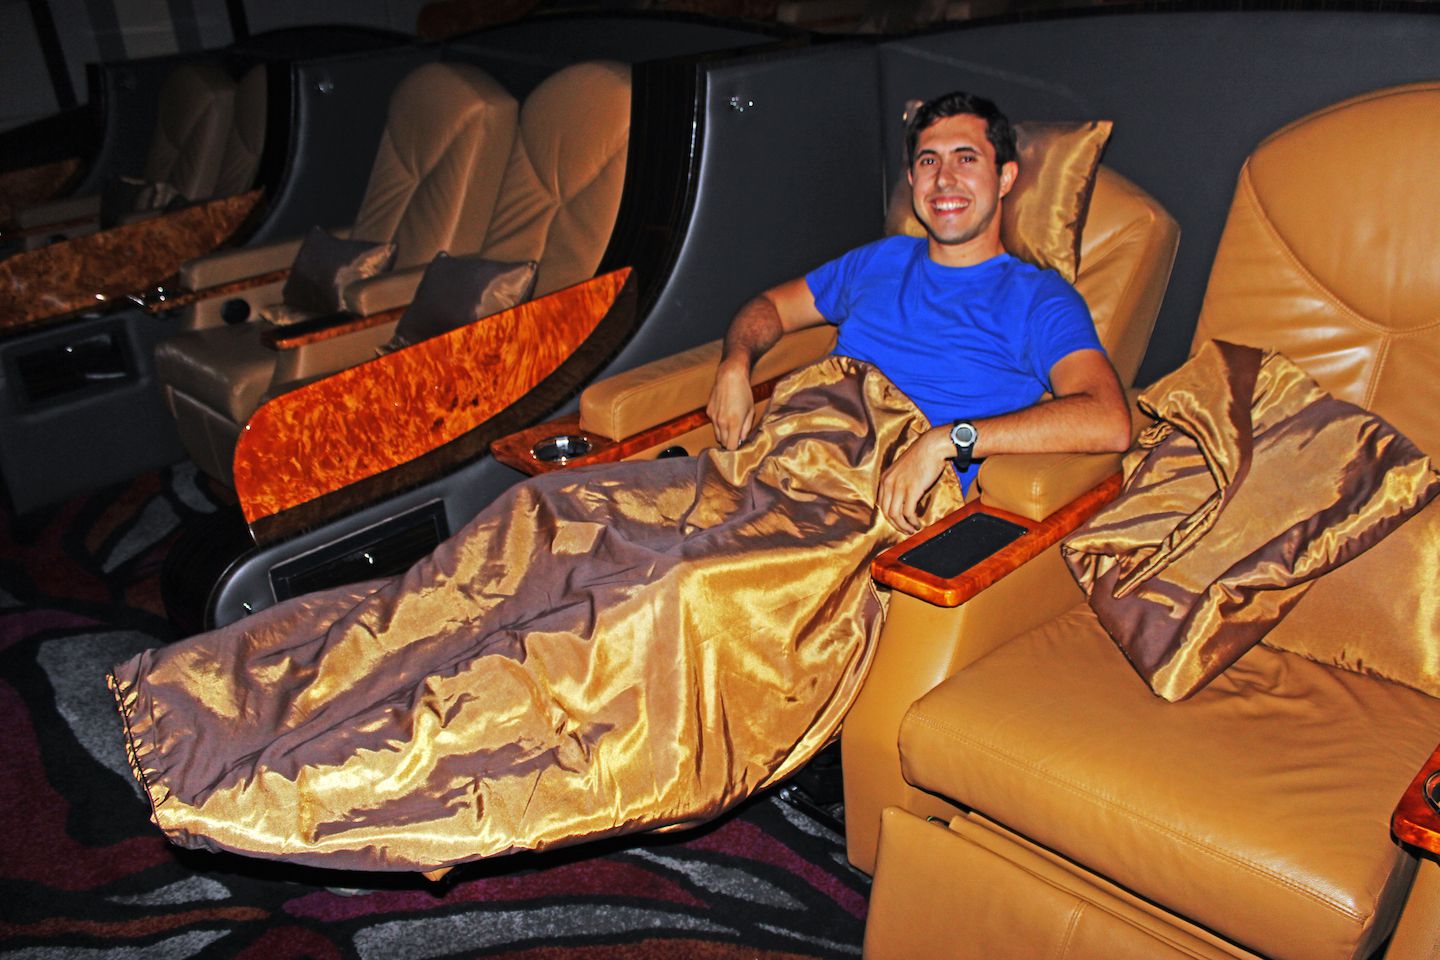 Carlos in the UltraScreen theatre at the Major Cineplex in Chiang Mai